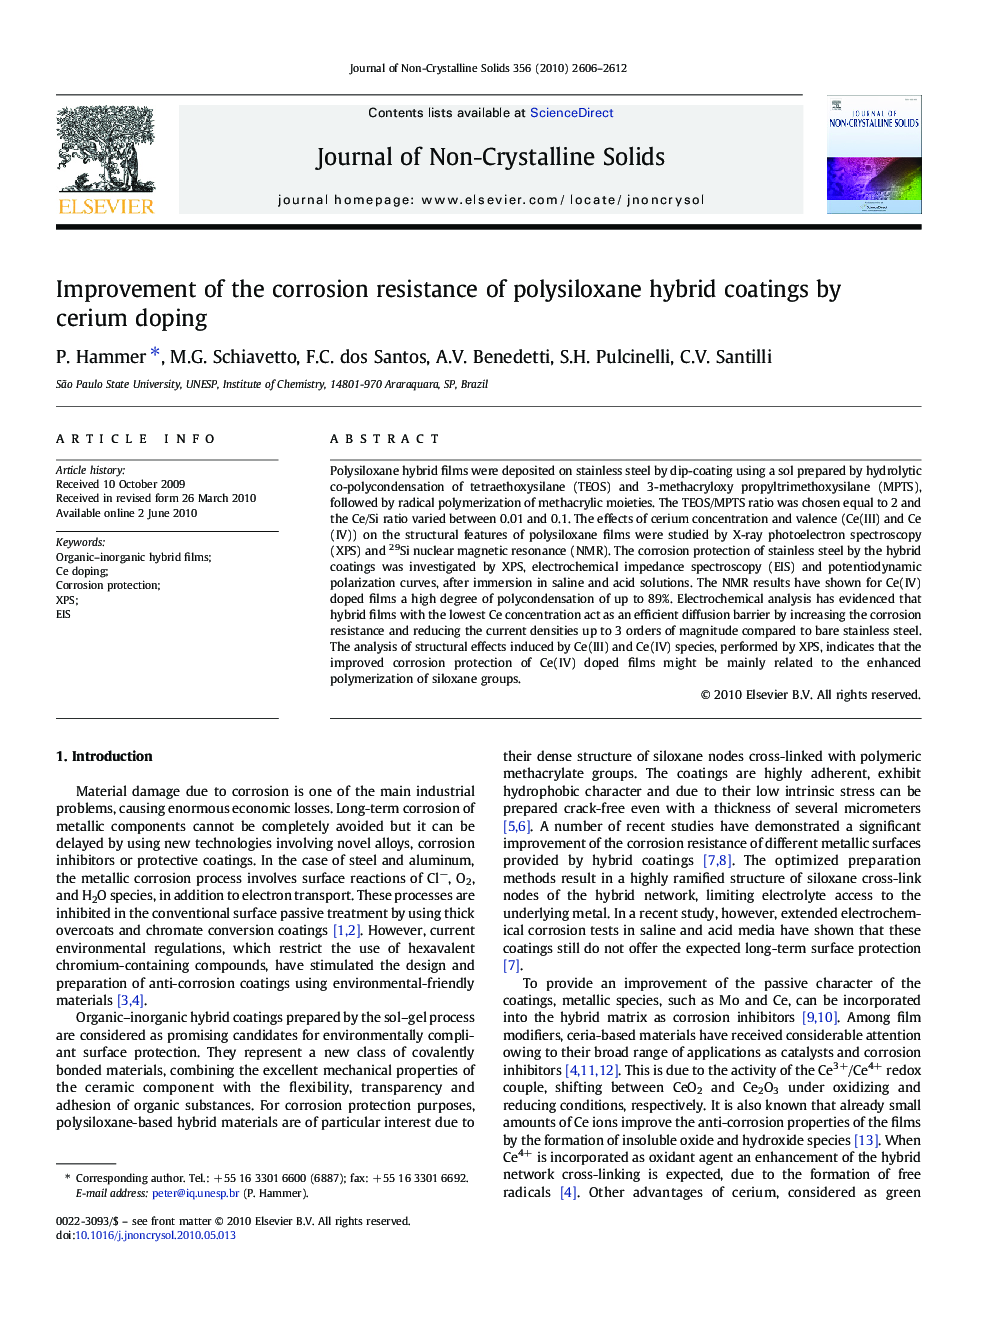 Improvement of the corrosion resistance of polysiloxane hybrid coatings by cerium doping